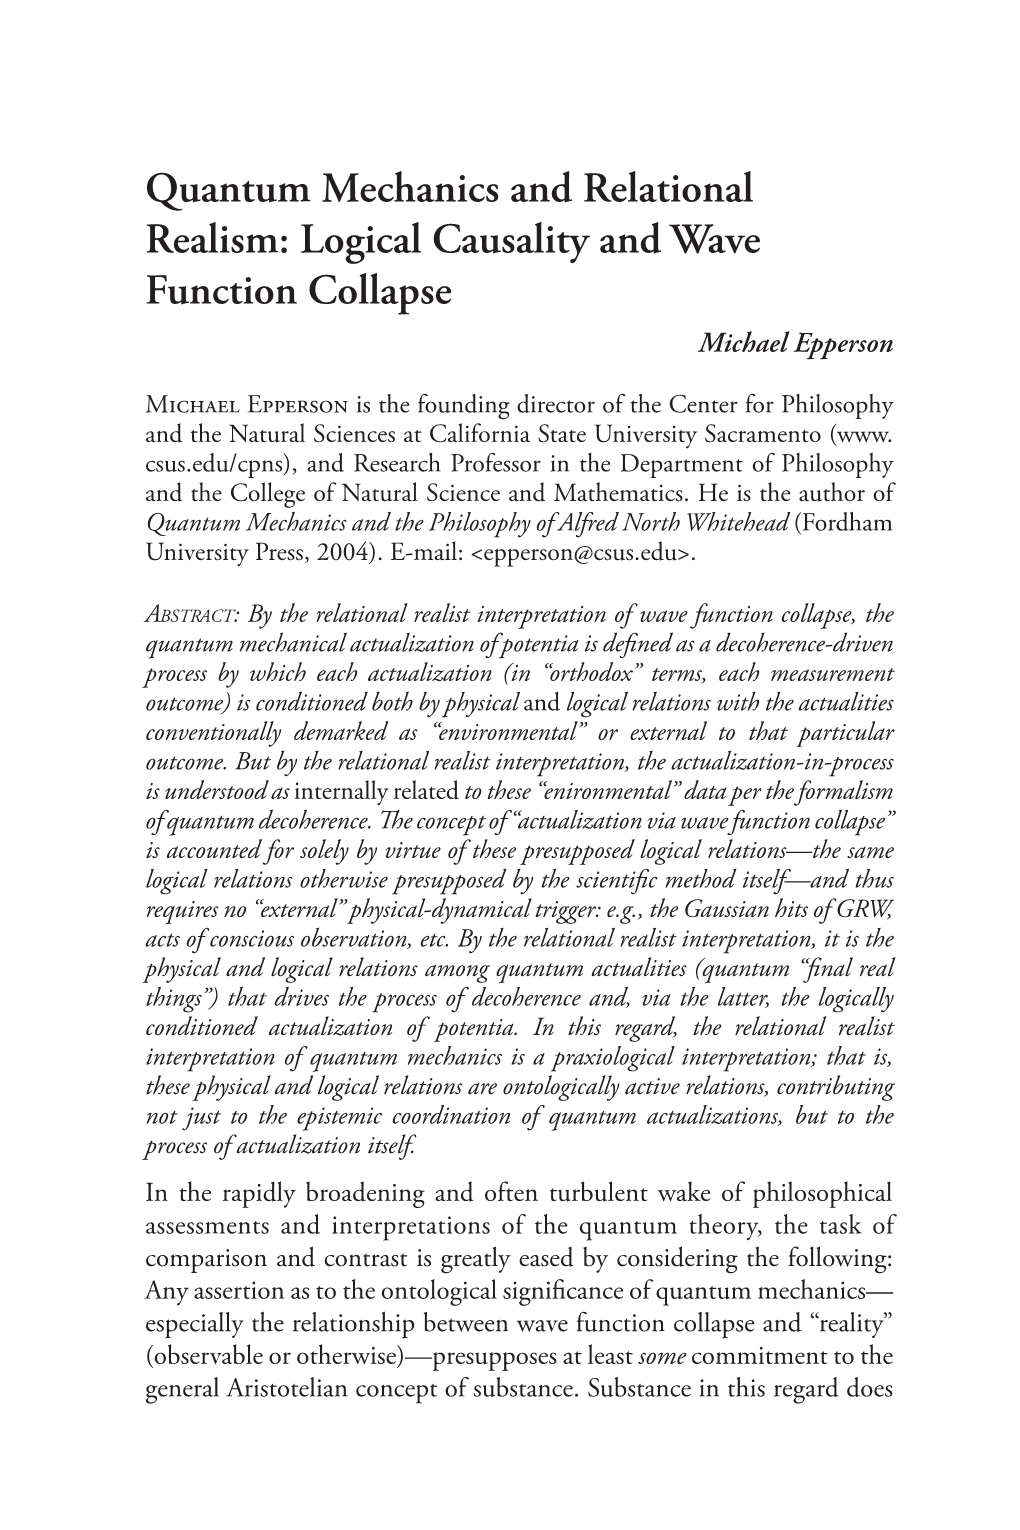 Quantum Mechanics and Relational Realism: Logical Causality and Wave Function Collapse Michael Epperson